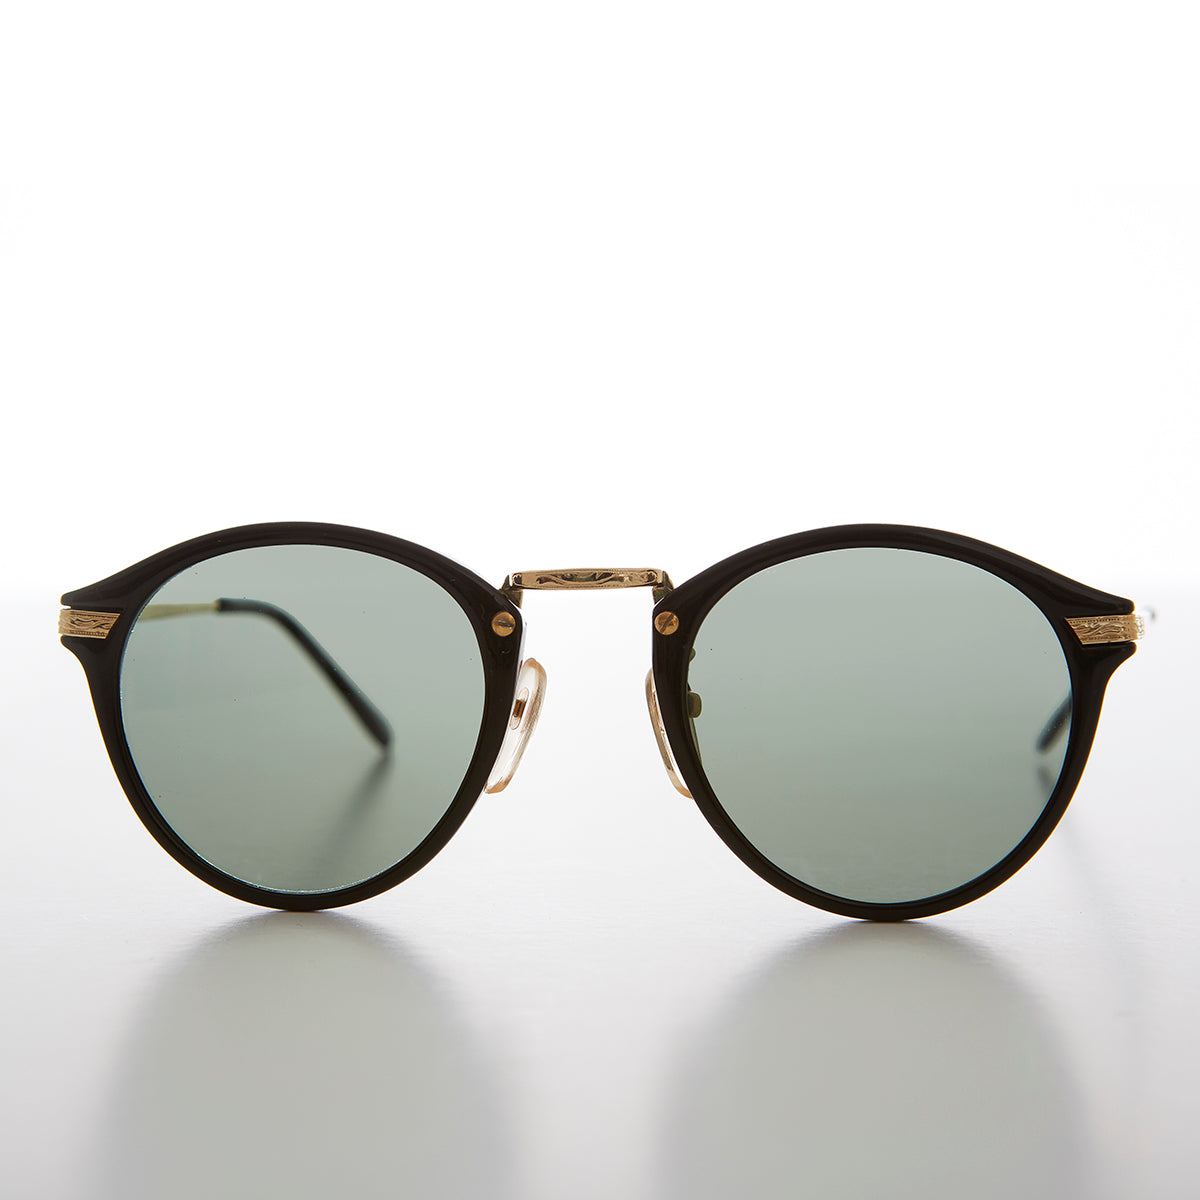 Round P3 Vintage Sunglass with Gold Temples and Bridge